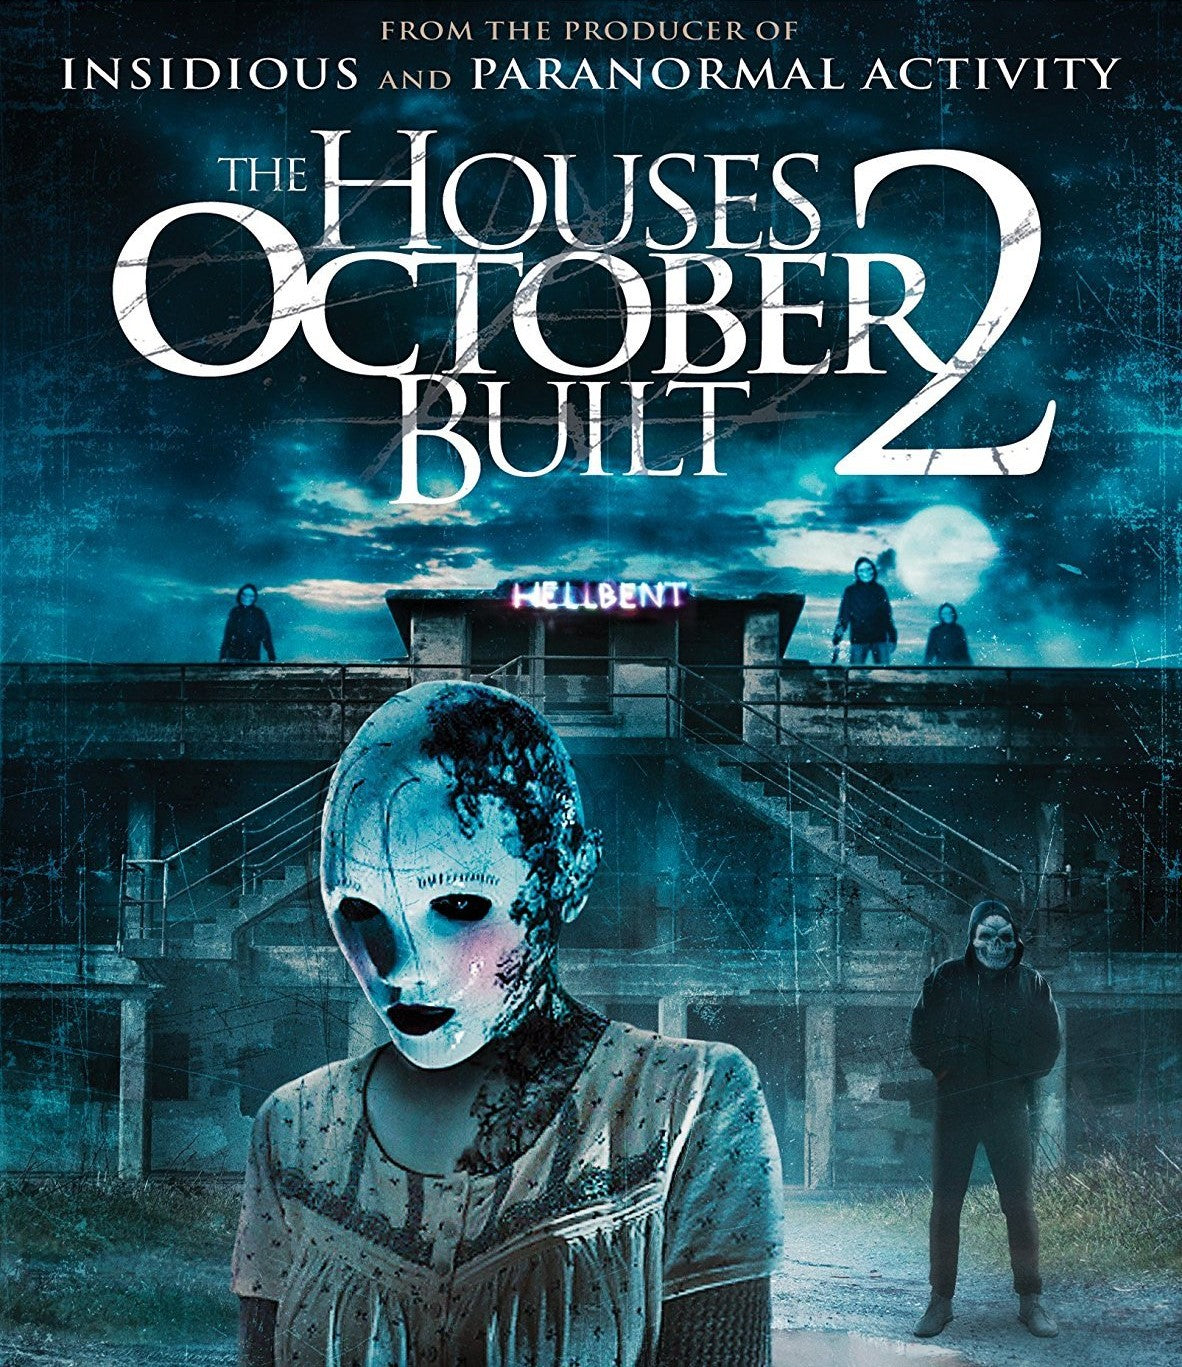 THE HOUSES OCTOBER BUILT 2 BLU-RAY